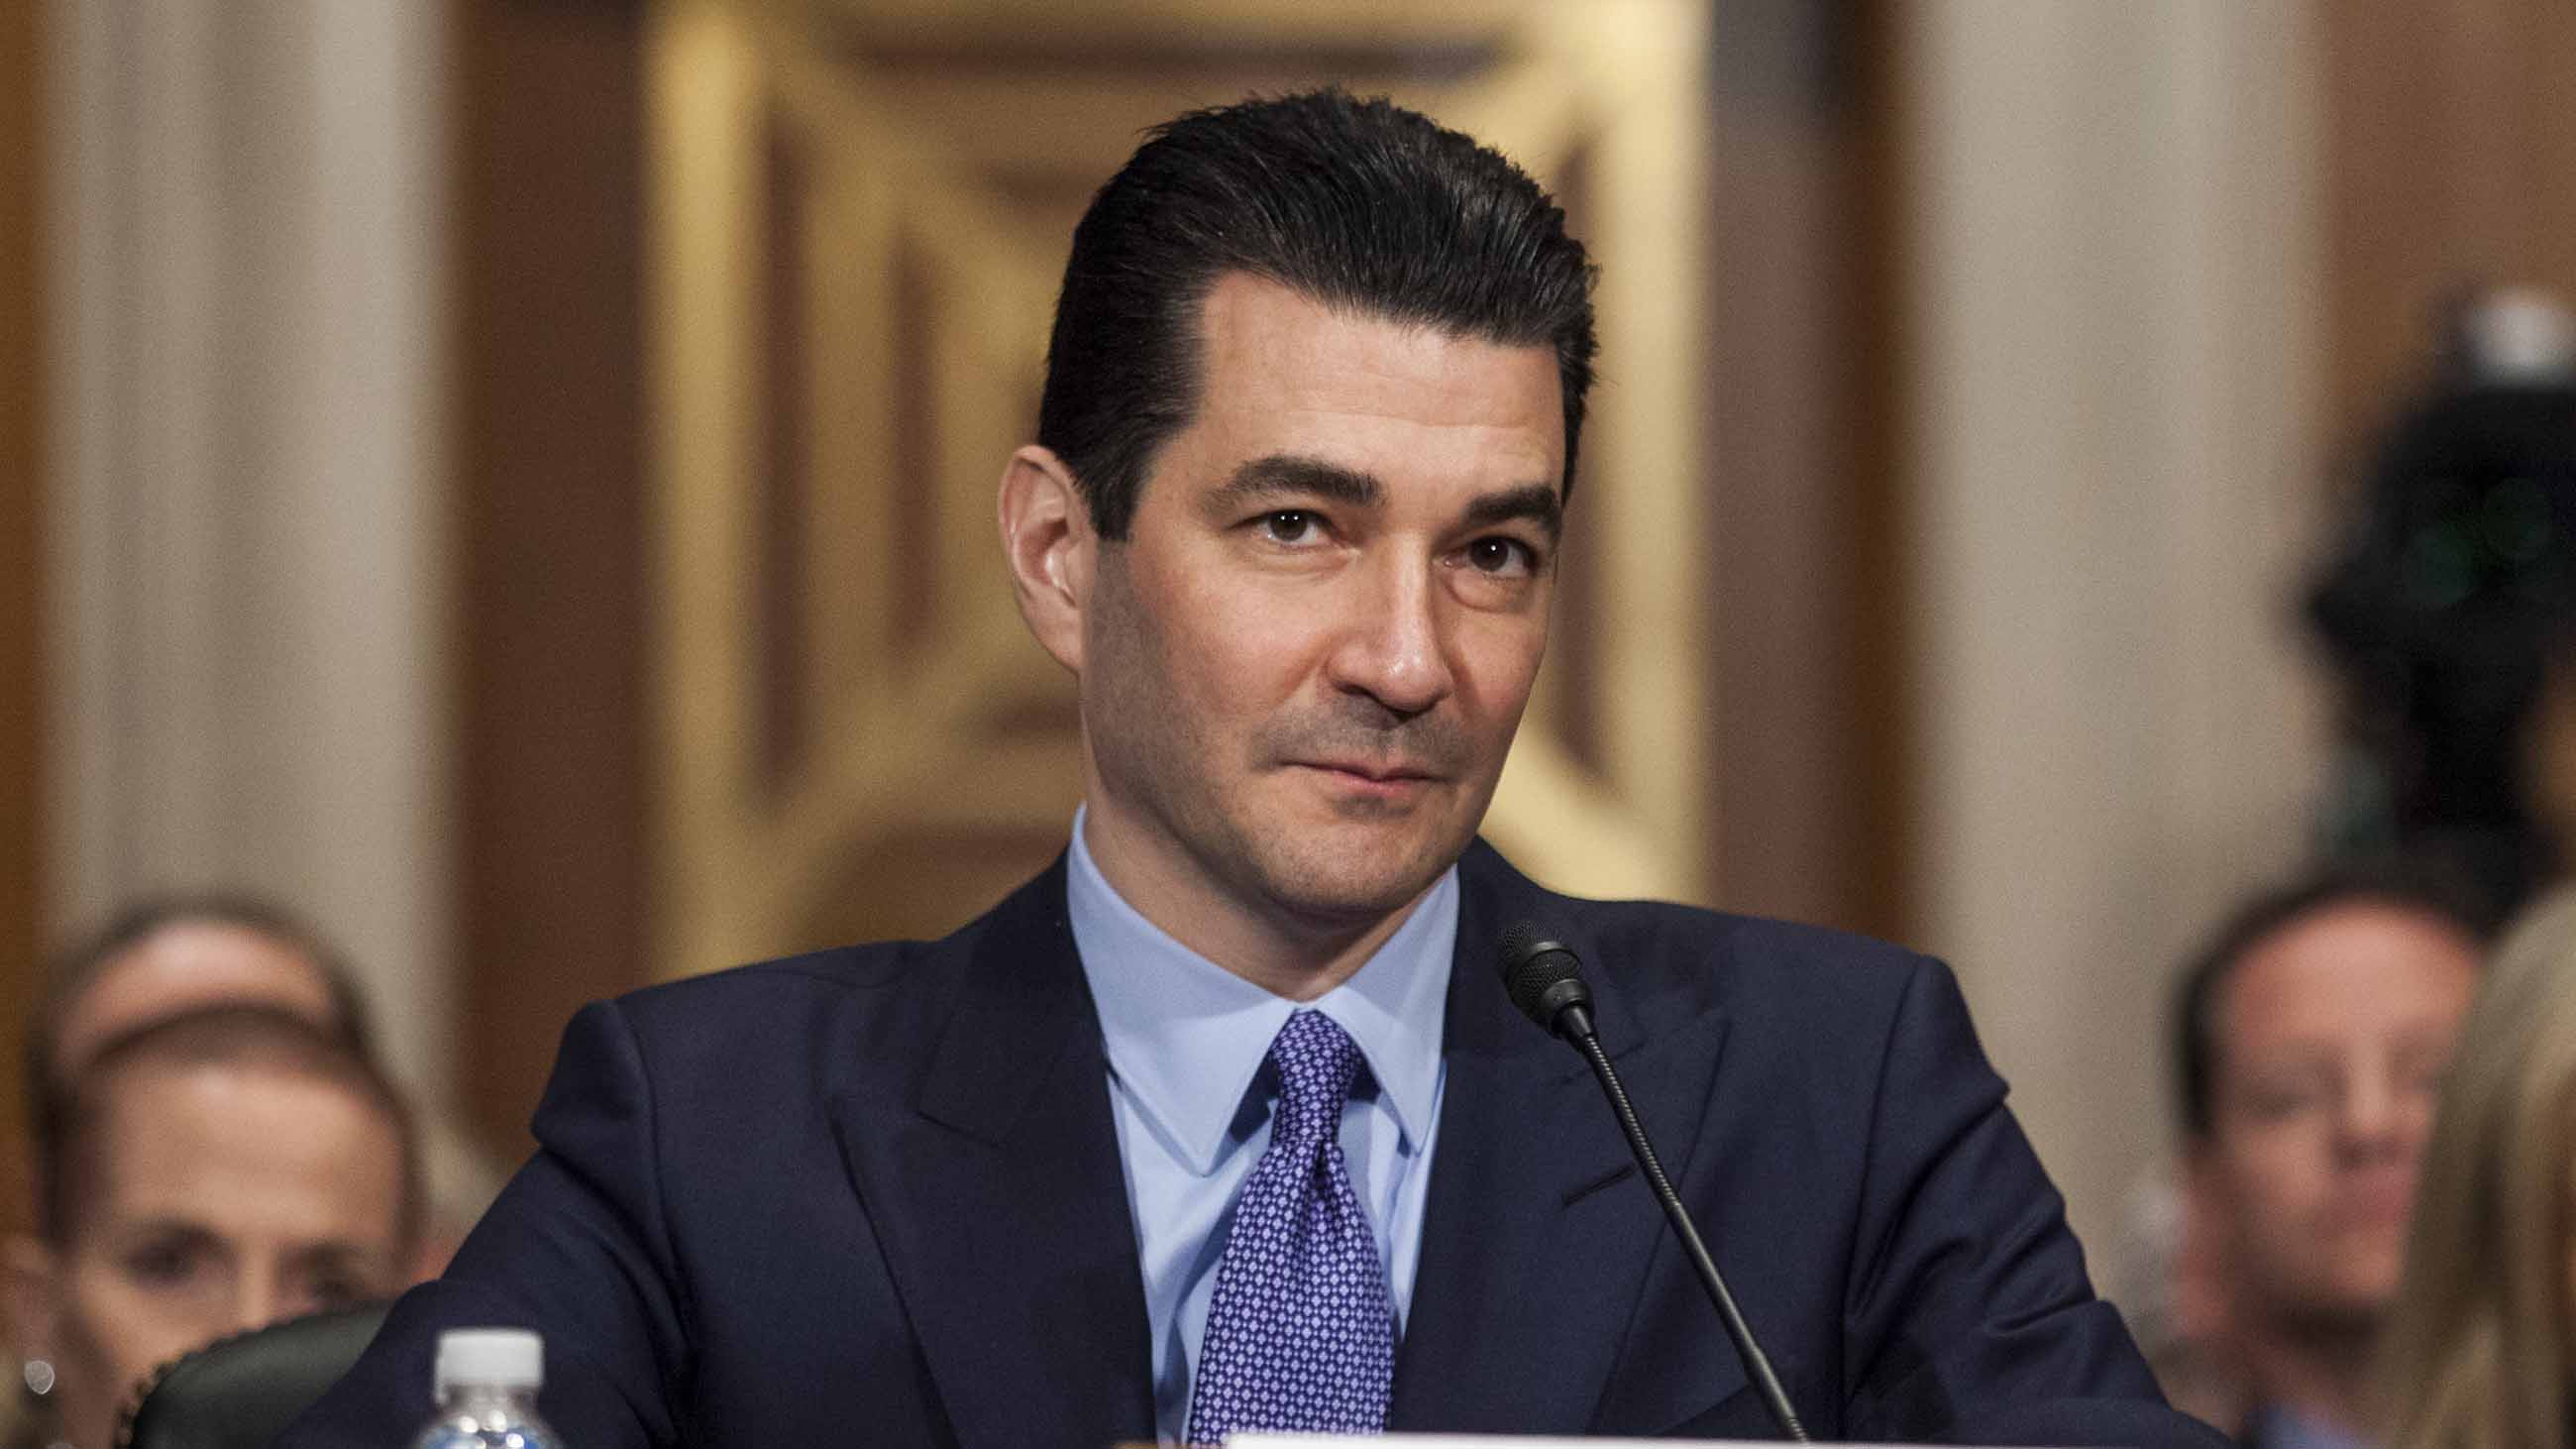 Trumps nominee for FDA Commissioner, Scott Gottlieb, sounds like a patient advocate. Is he?